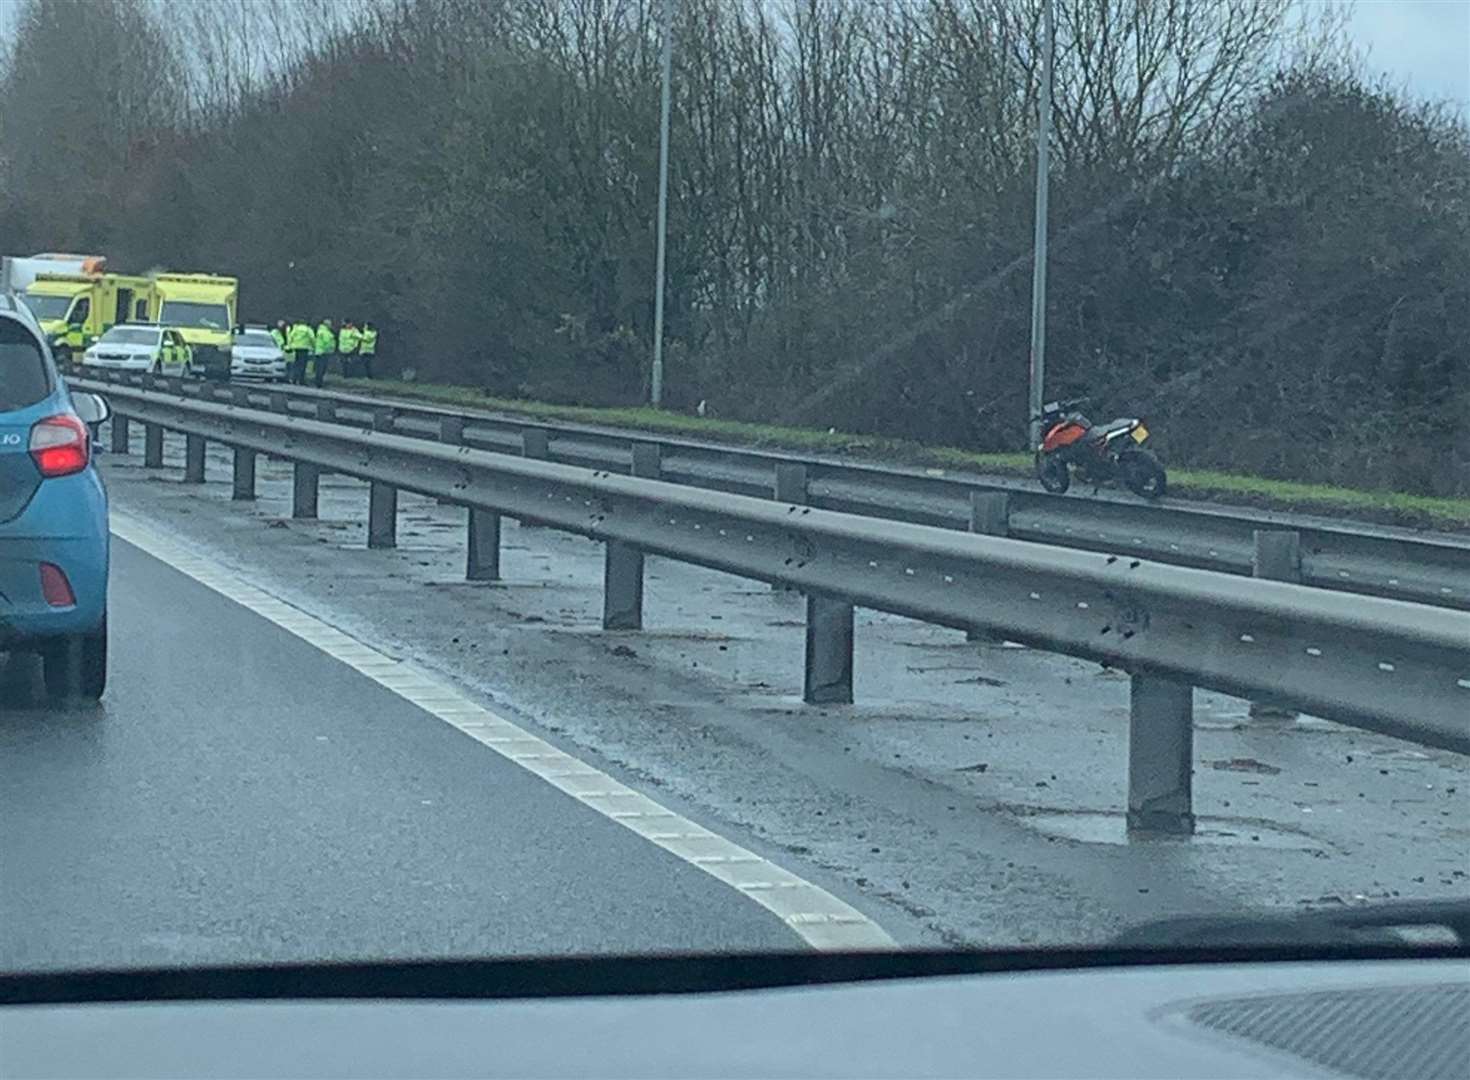 The coastbound carriageway is closed between the Brenley Corner roundabout and the Dargate Services as a result. Picture: Jane Lynch